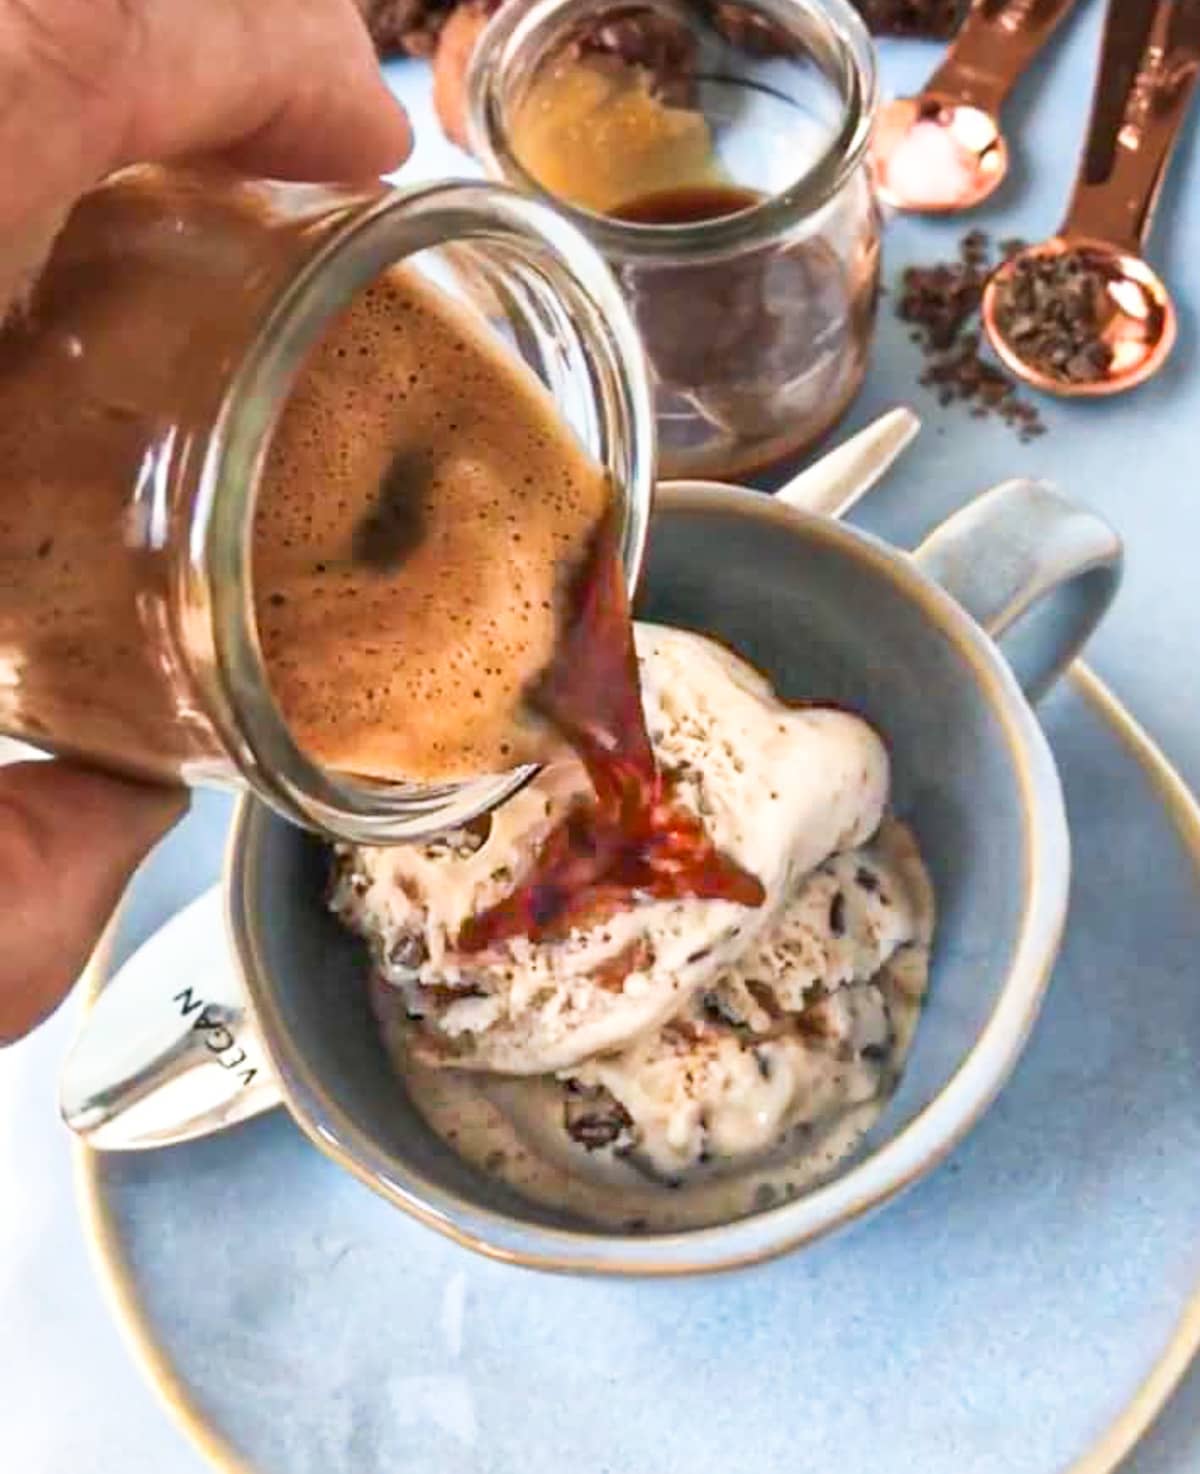 Espresso being poured over ice cream in a mug.